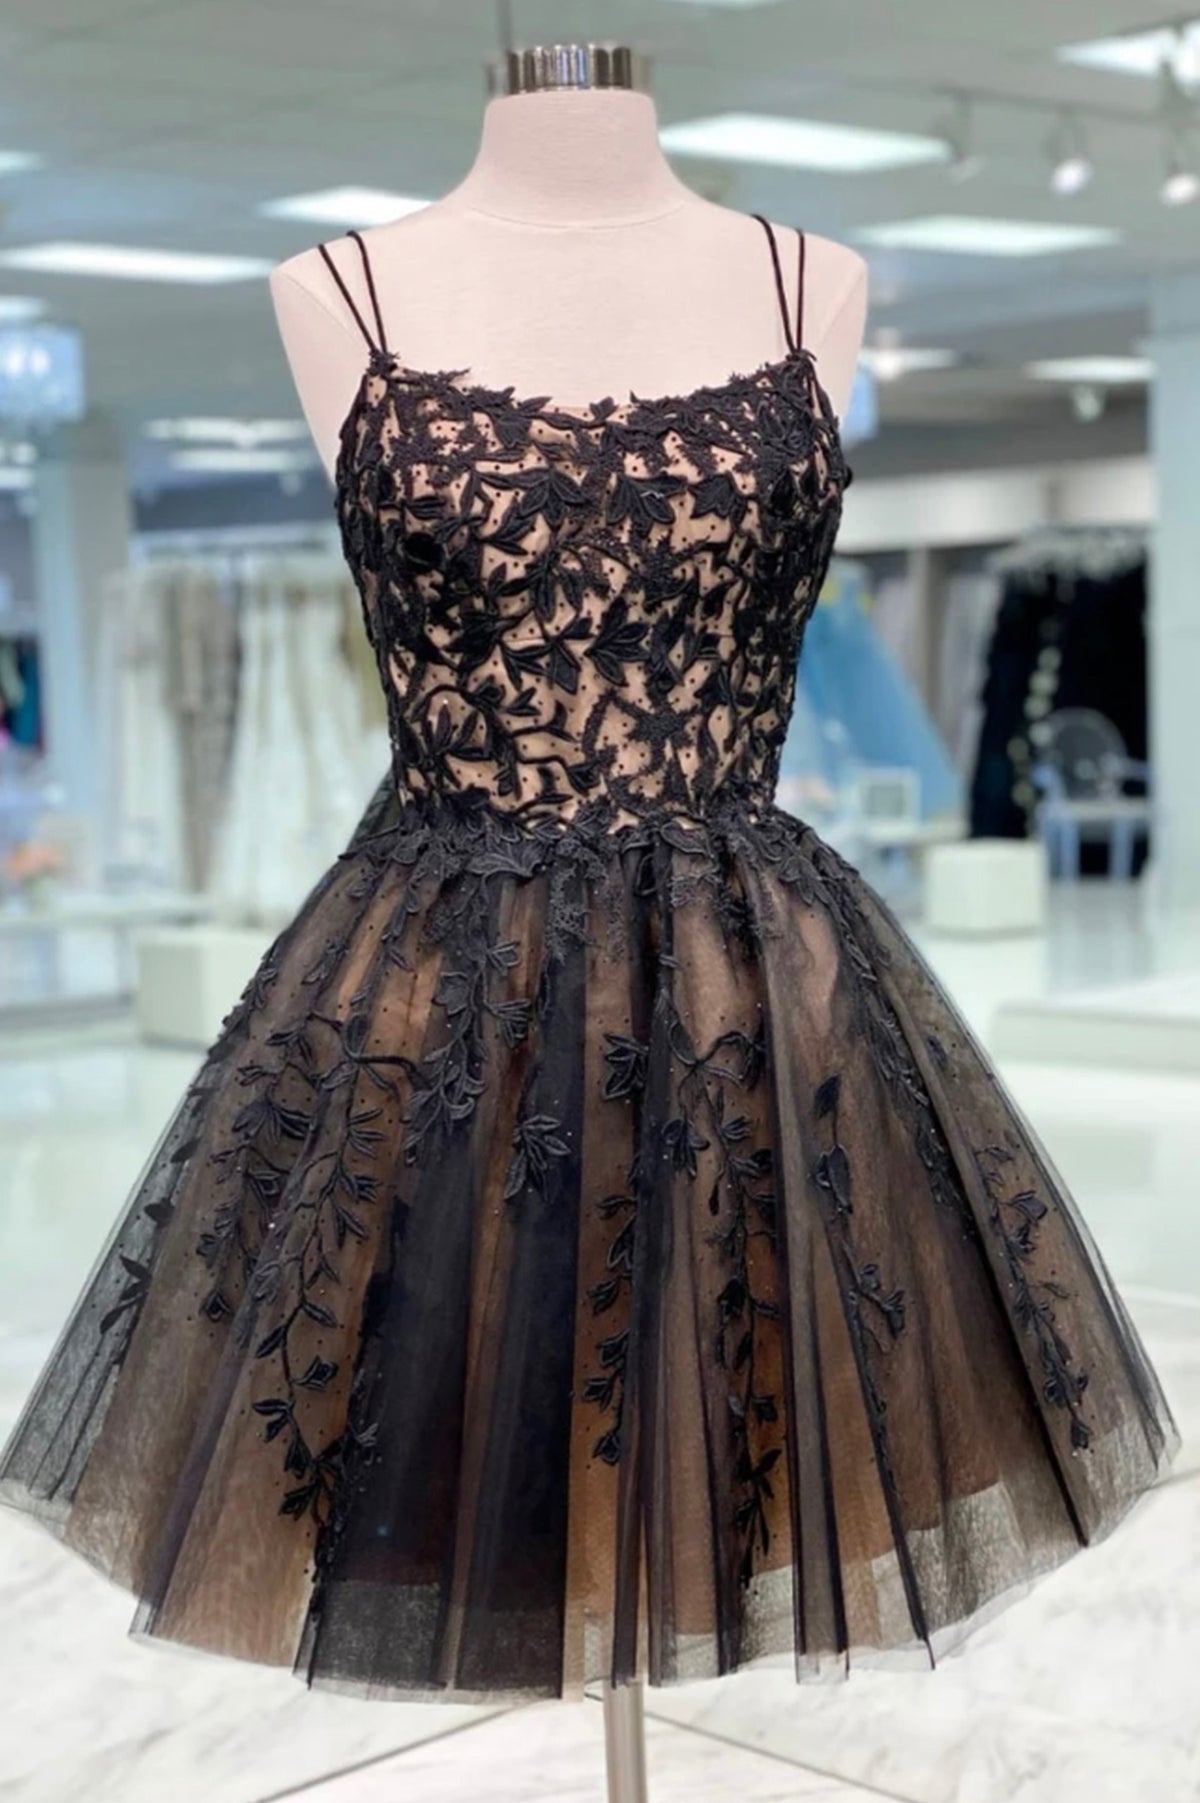 Black Lace Short Prom Dress, Cute A-Line Homecoming Party Dress